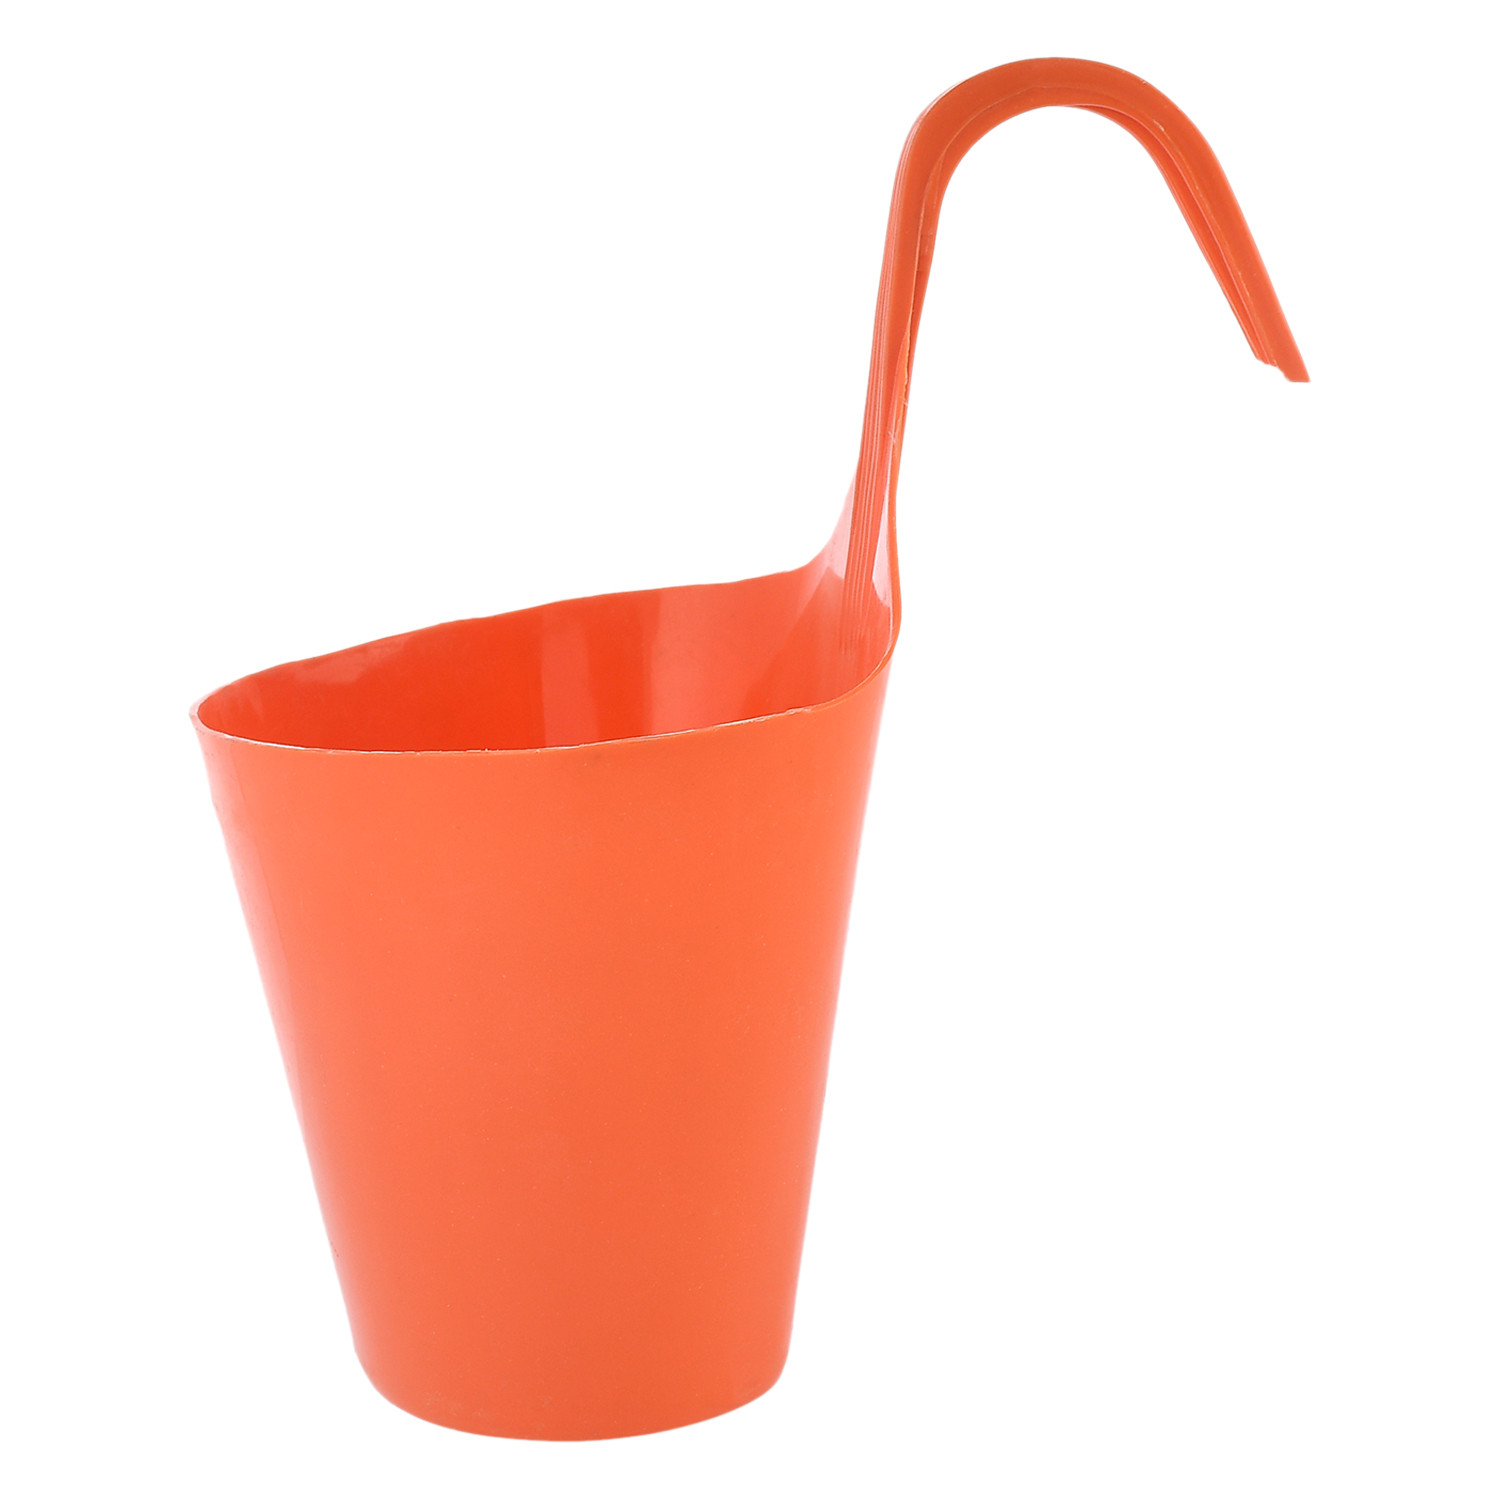 Kuber Industries Hanging Flower Pot|Single Hook Plant Container|Durable Plastic Glossy Finish Pots for Home|Balcony|Garden|9 Inch|Pack of 5 (Multicolor)